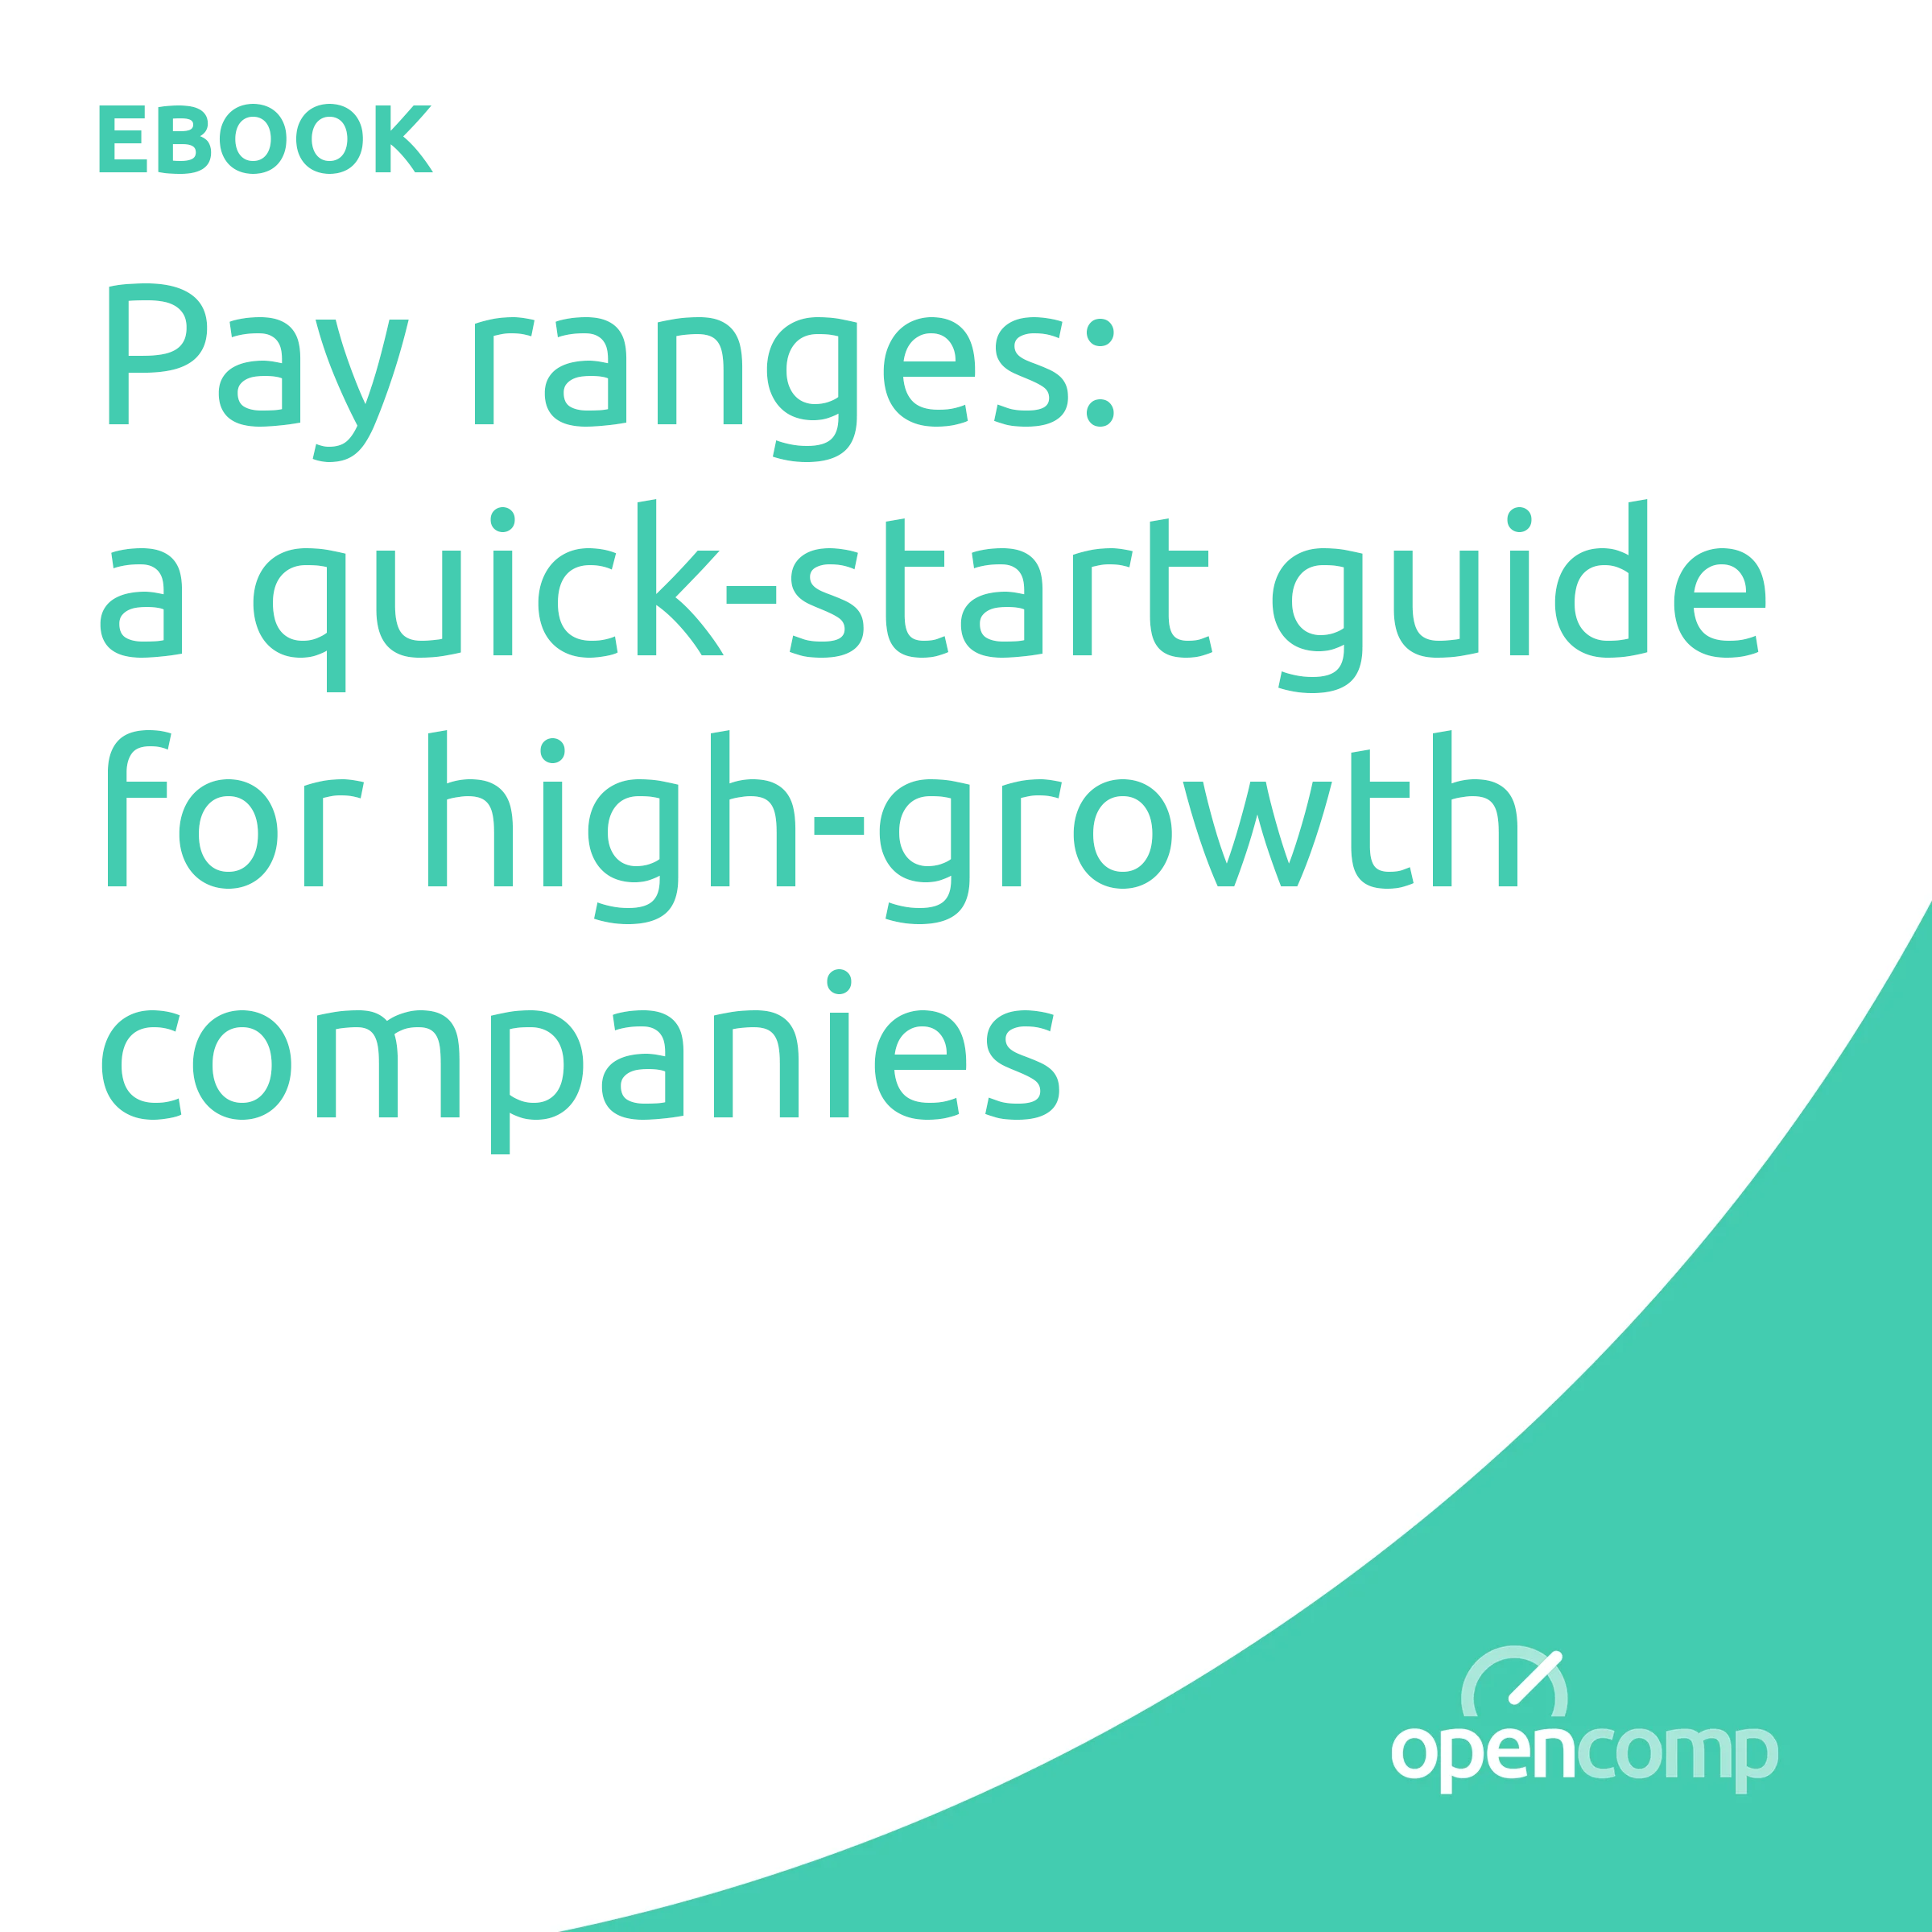 eBook: A Quick-Start Guide to Pay Ranges